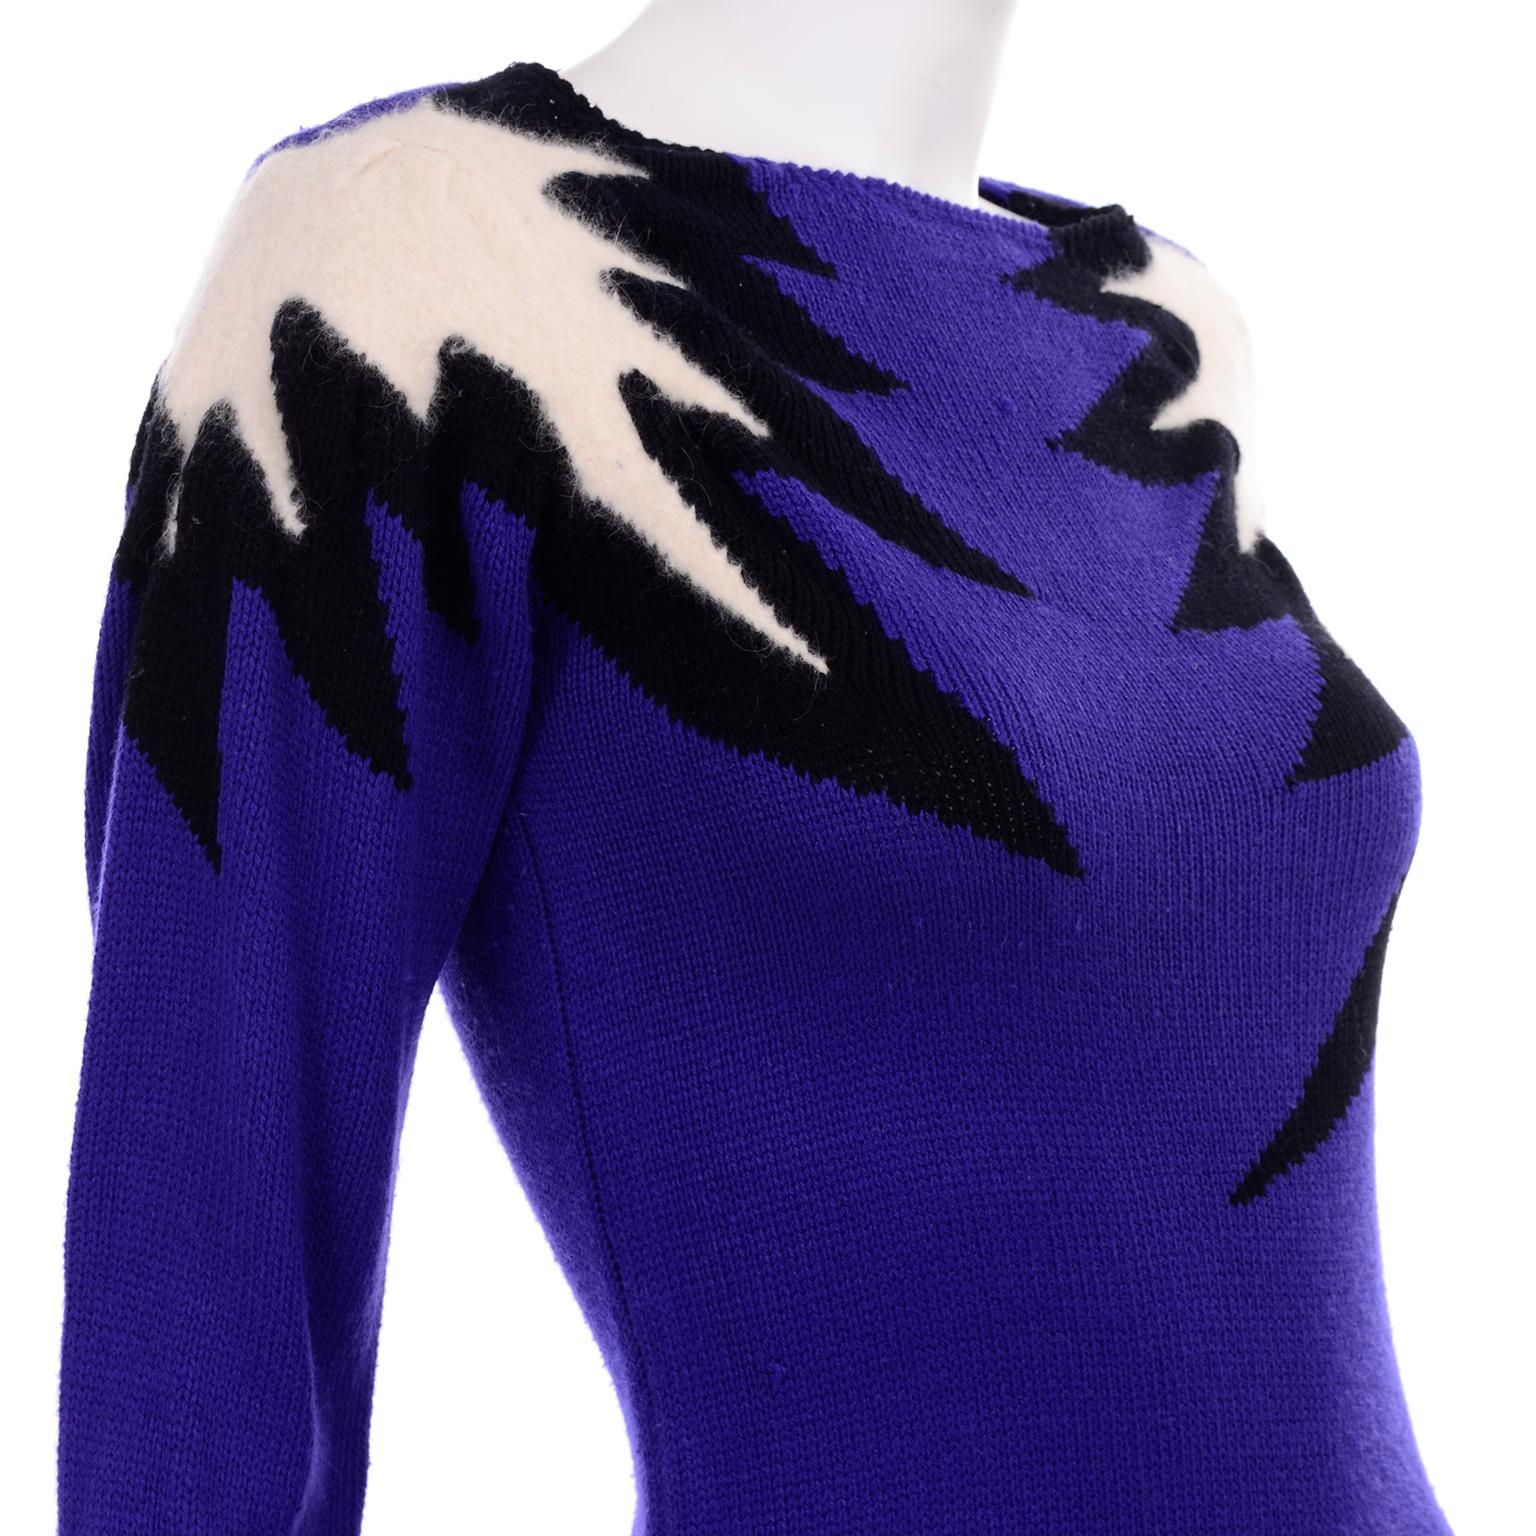 Women's Royal Blue Vintage Angora Sweater Dress With Cartoon Style Lightning Bolts  For Sale